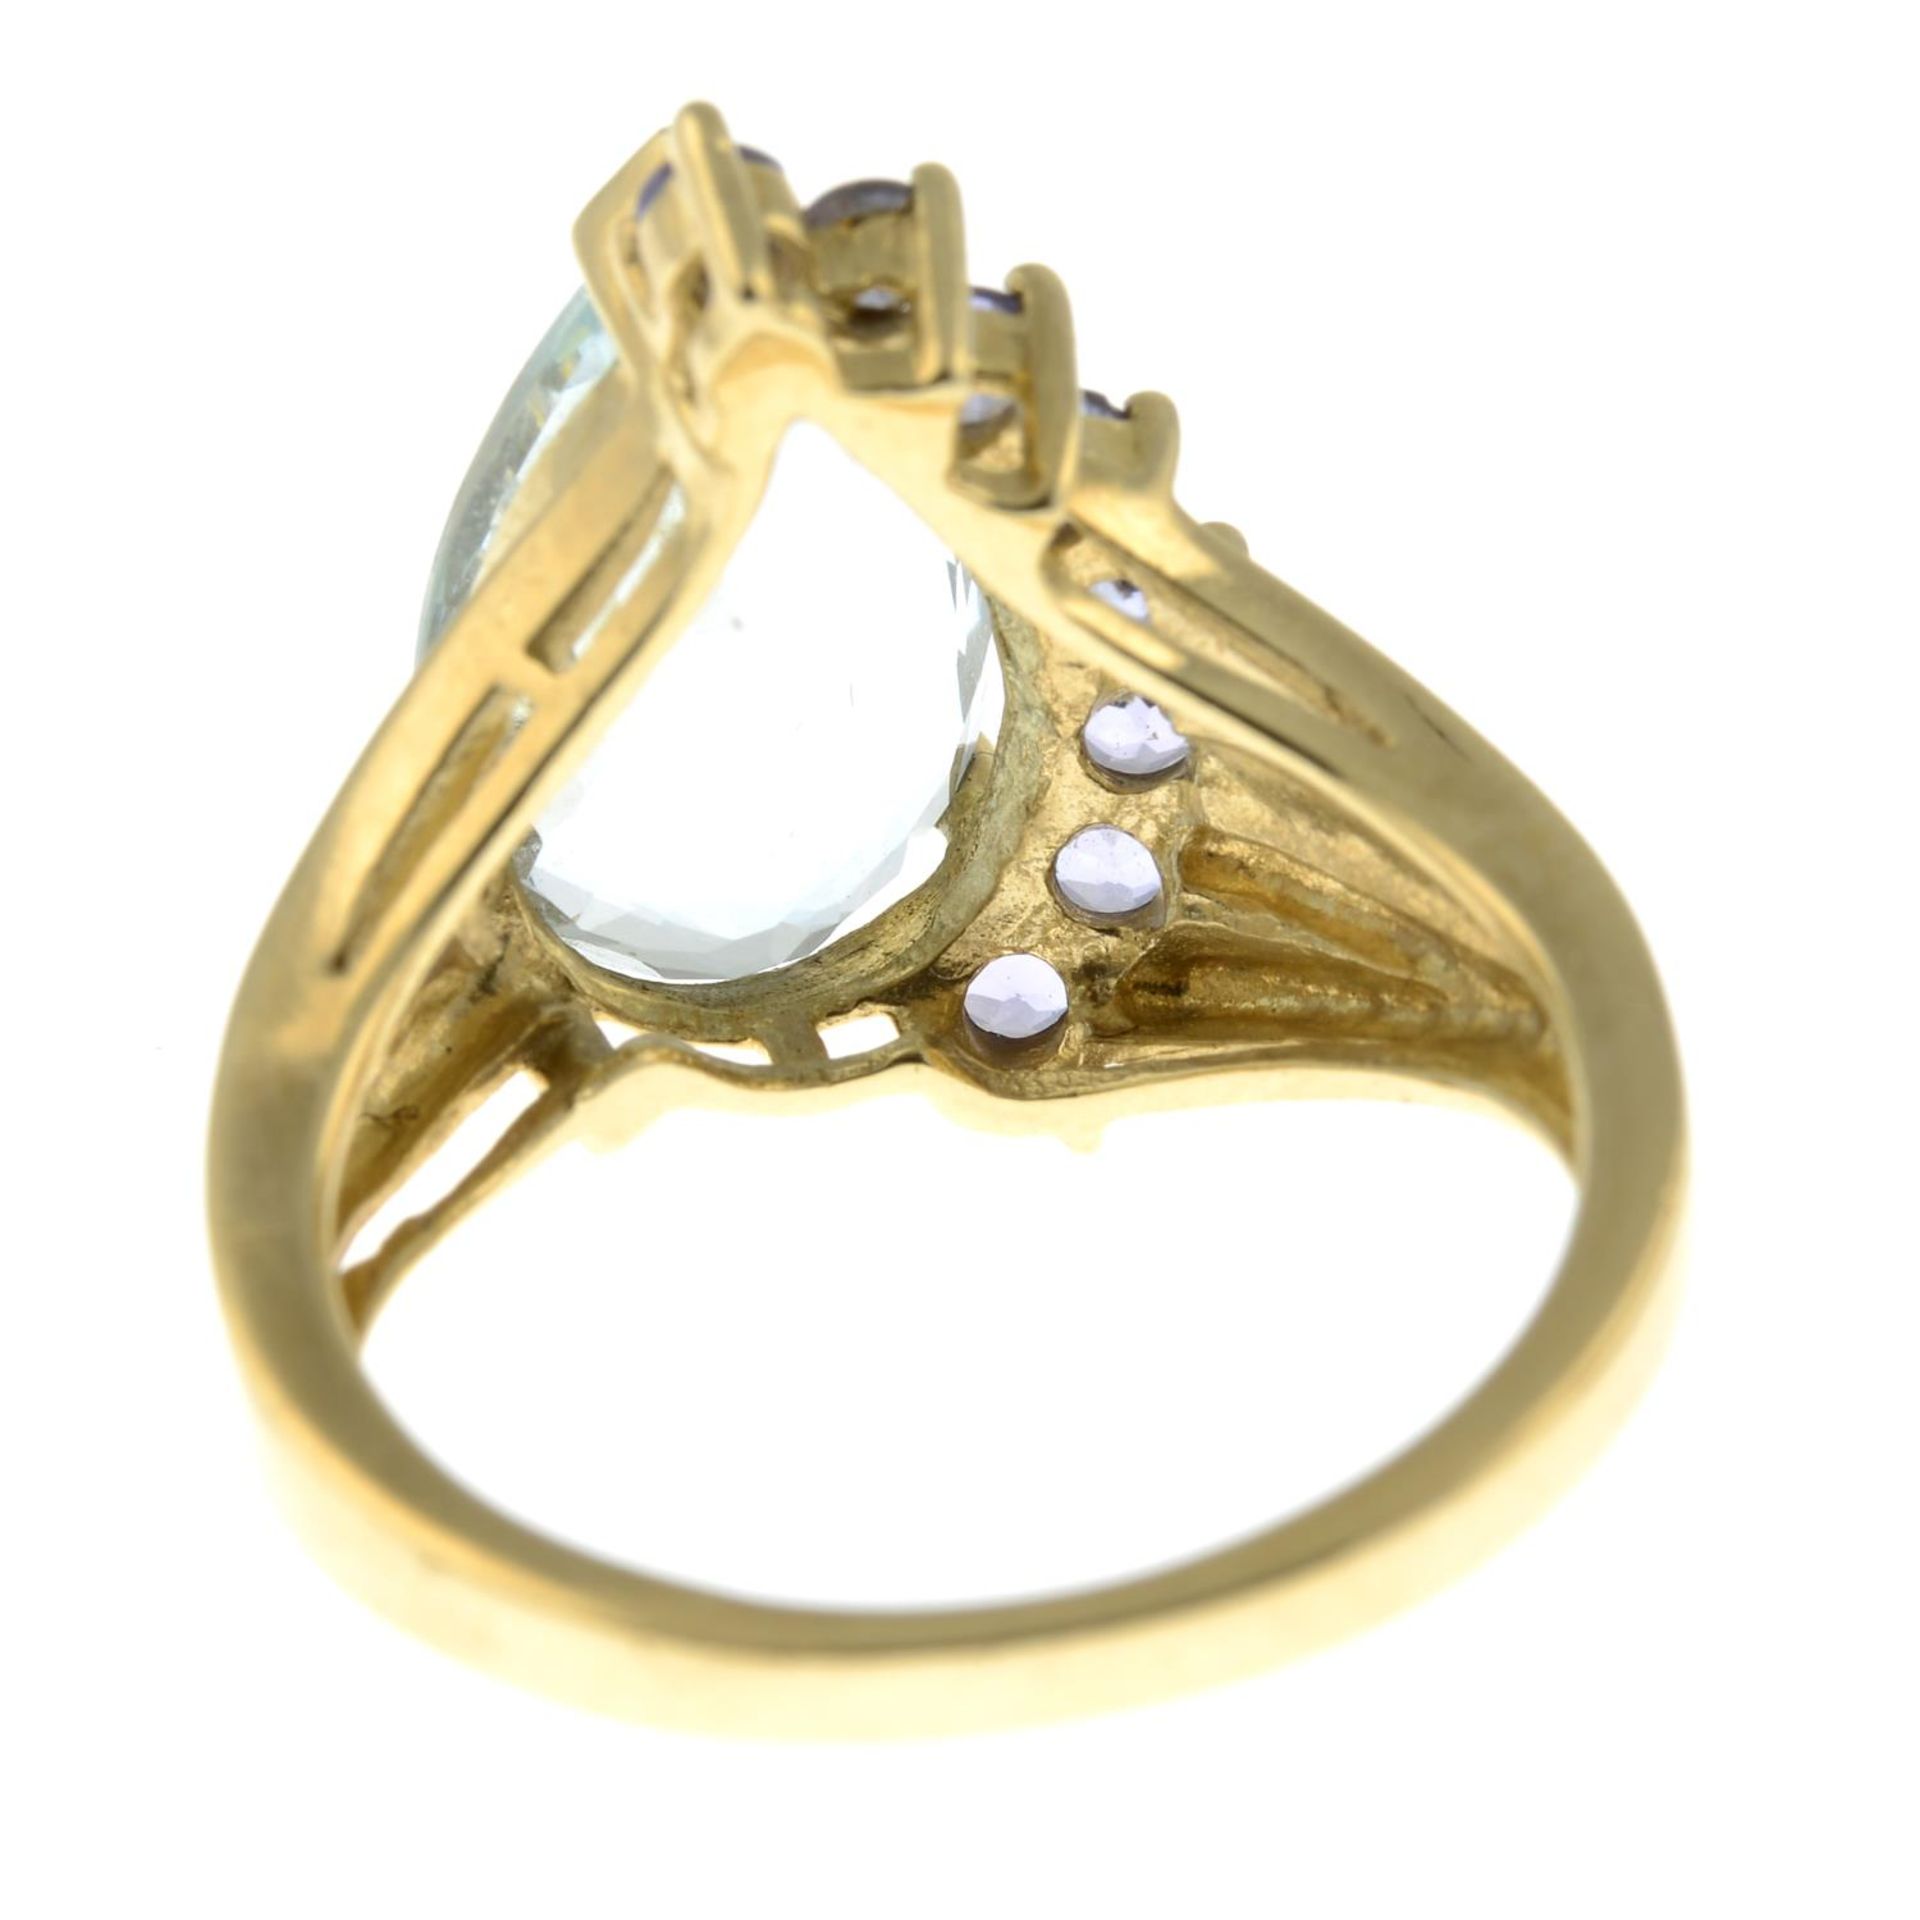 A 9ct gold aquamarine and gem-set dress ring.Hallmarks for 9ct gold. - Image 2 of 2